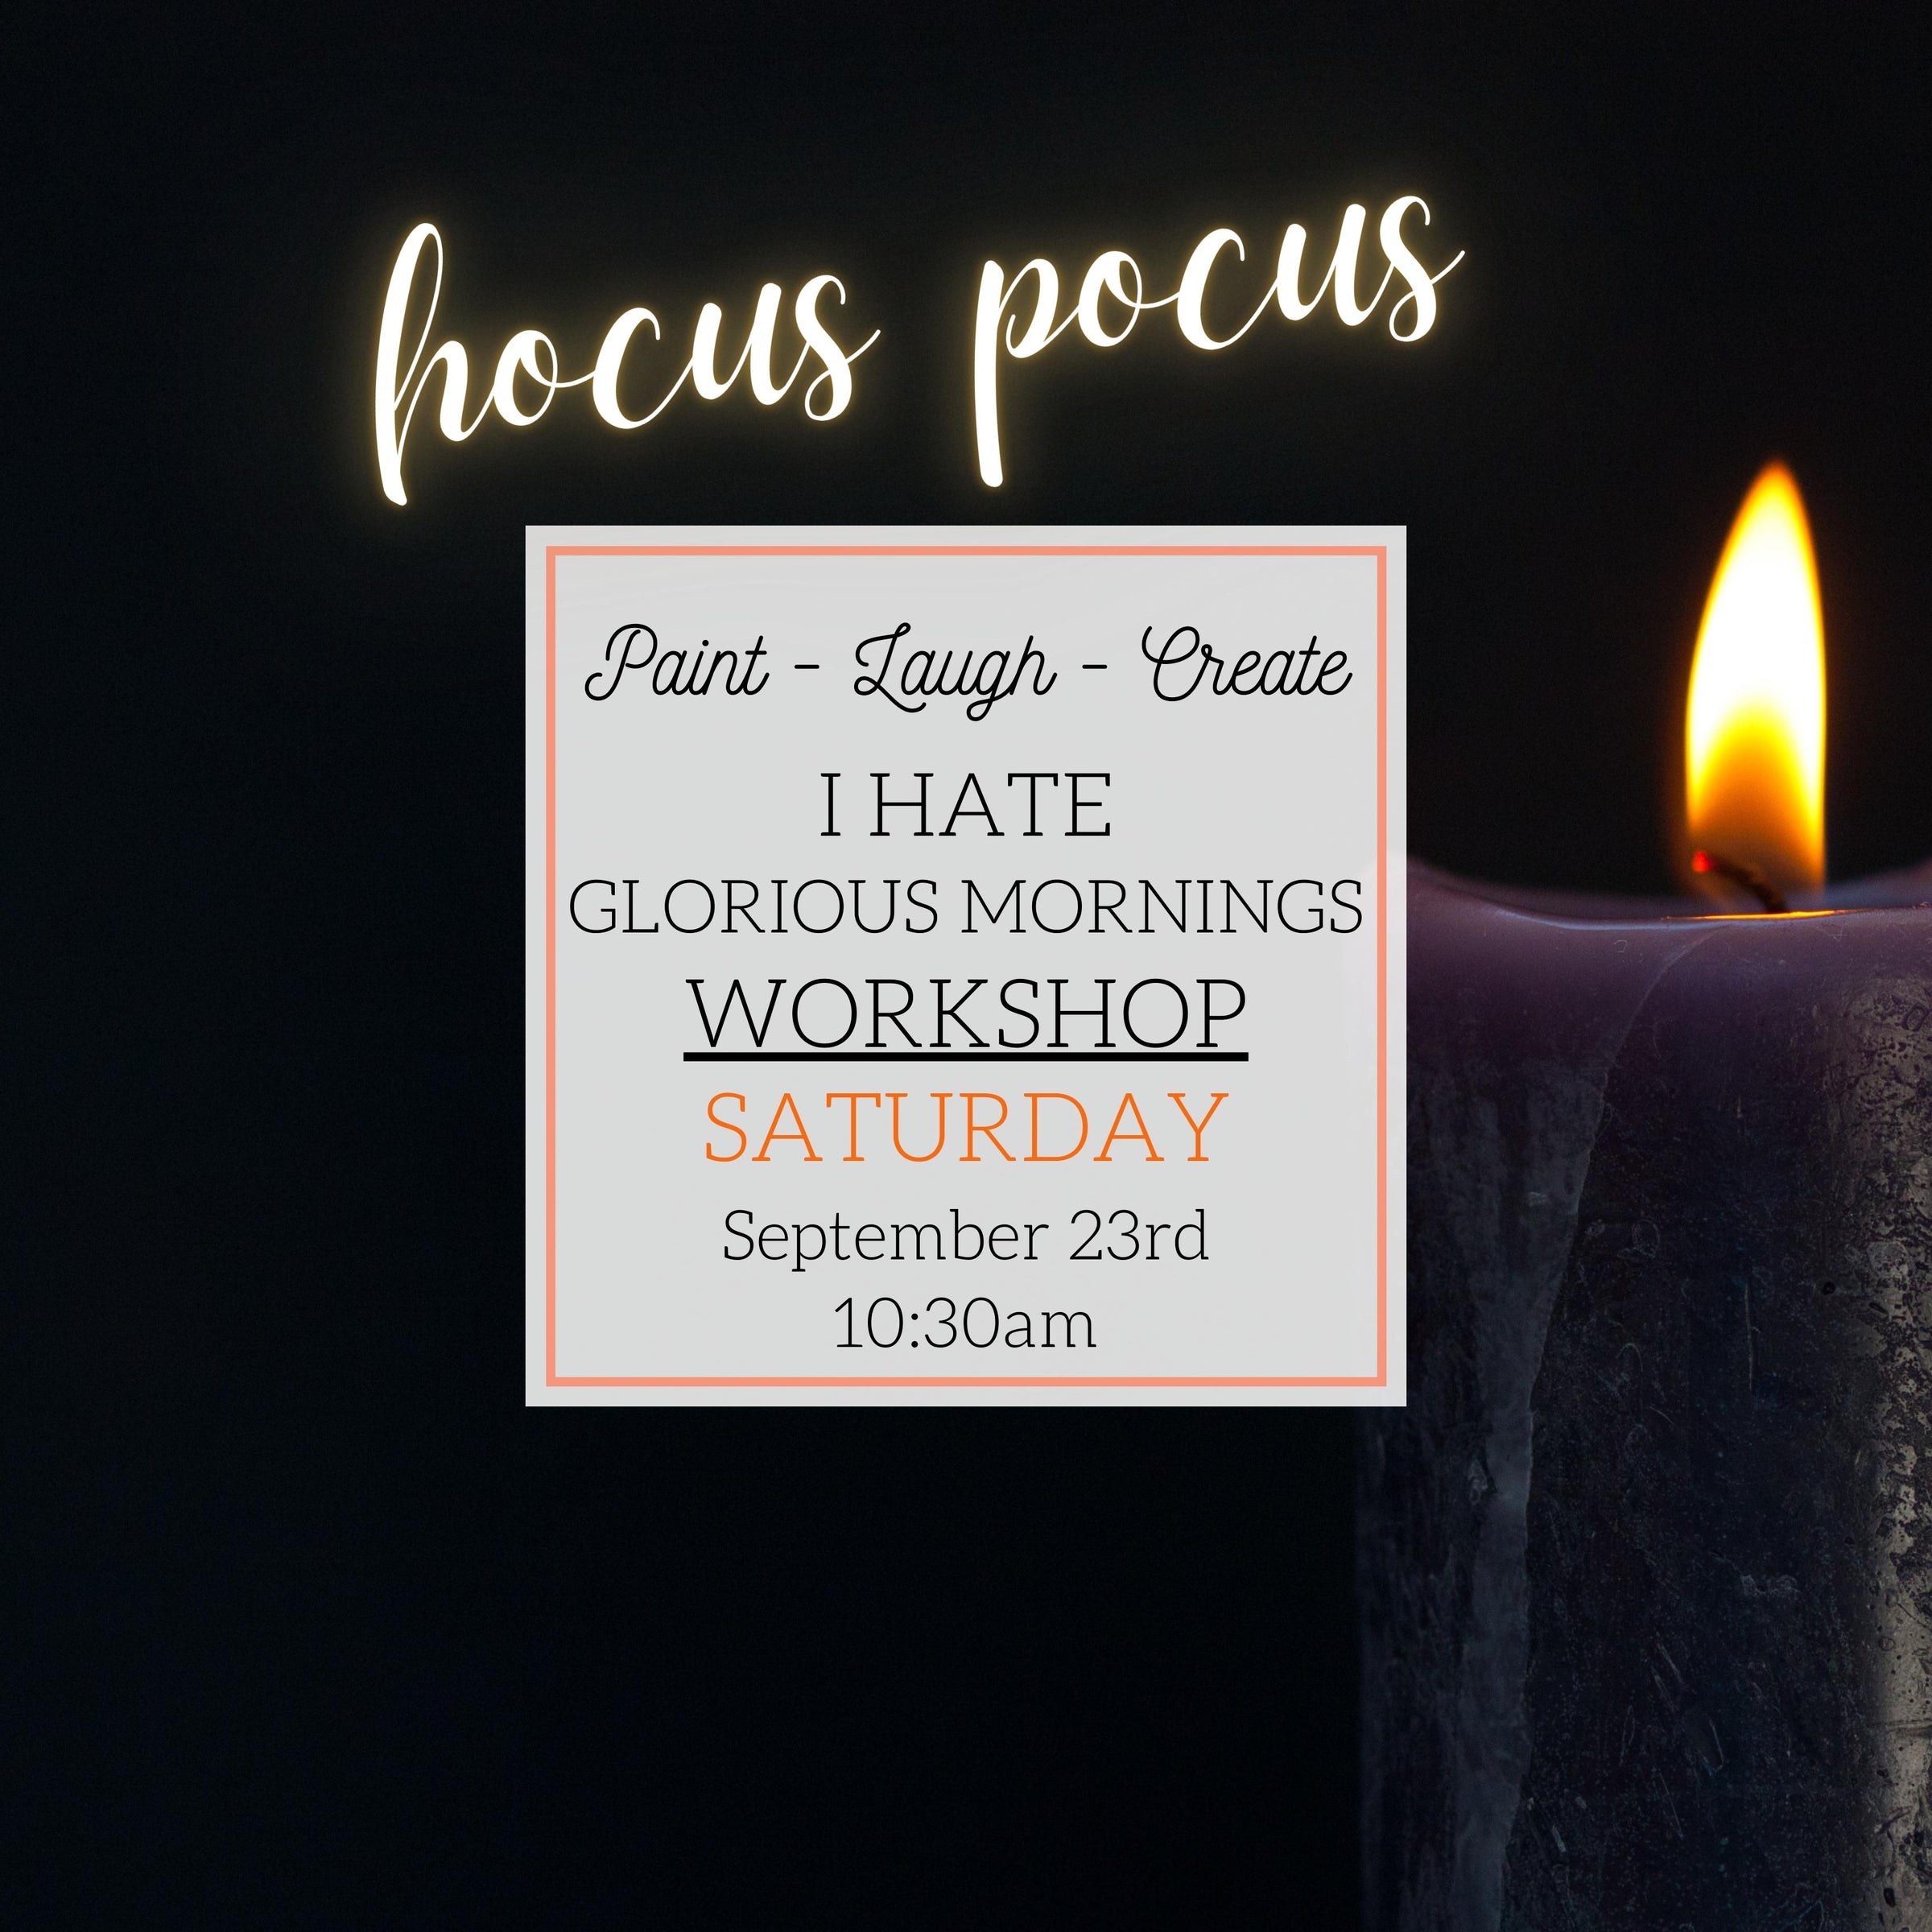 I HATE GLORIOUS MORNINGS WORKSHOP - SEPT 23RD, 10:30AM